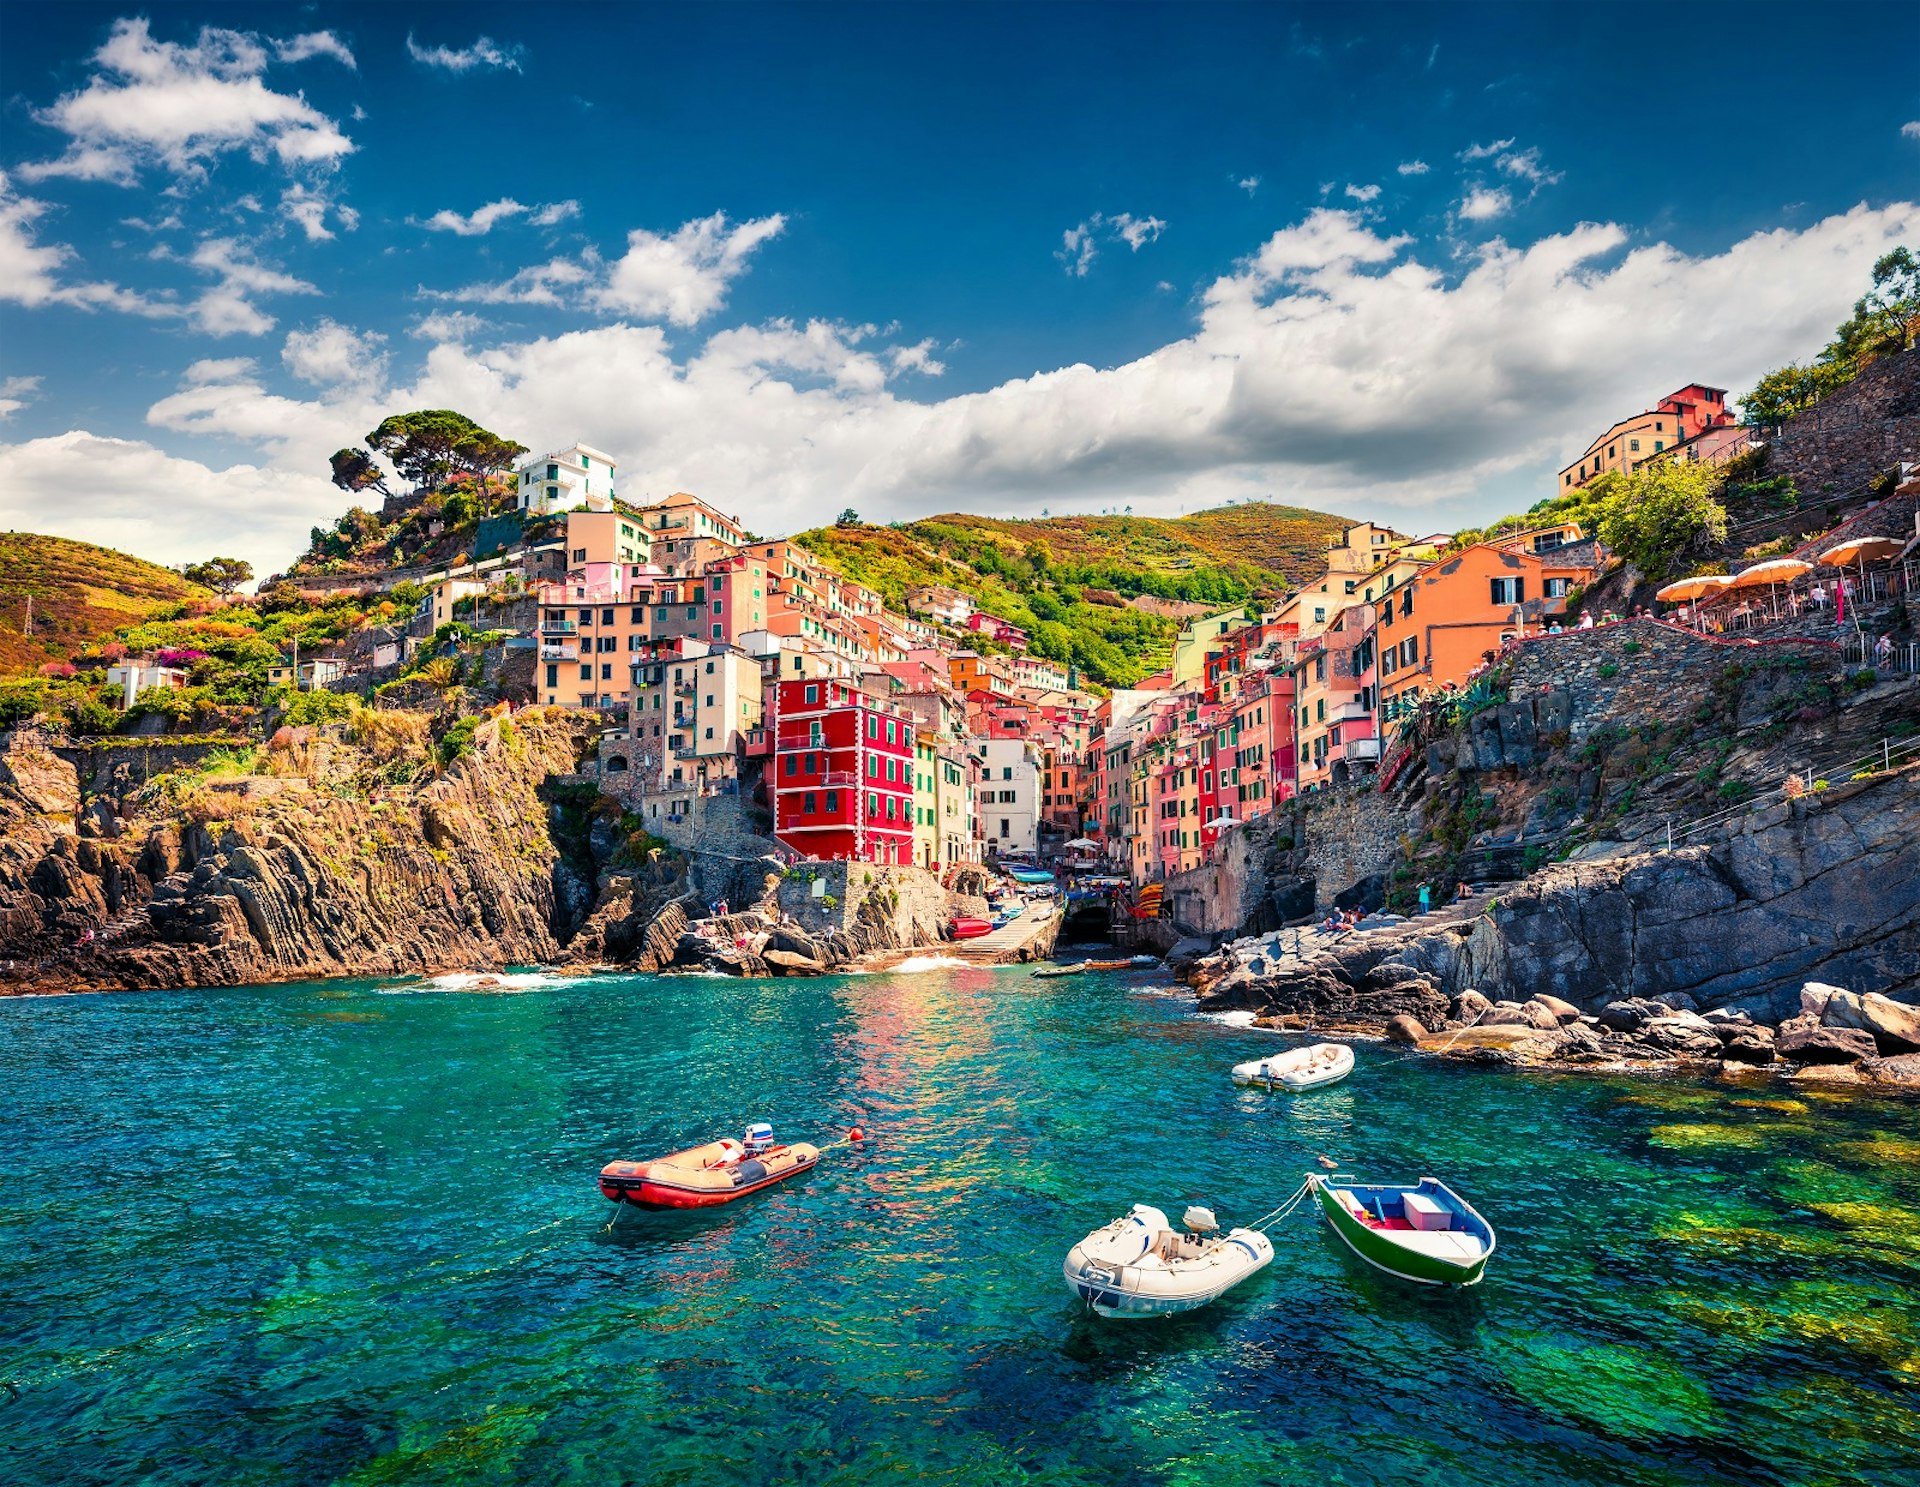 A view of the Cinque Terre, Italy, from the sea. There are a few dinghies moored in the foreground and beyond the beautiful blue water of the Mediterranean we can see the colourful hill cities